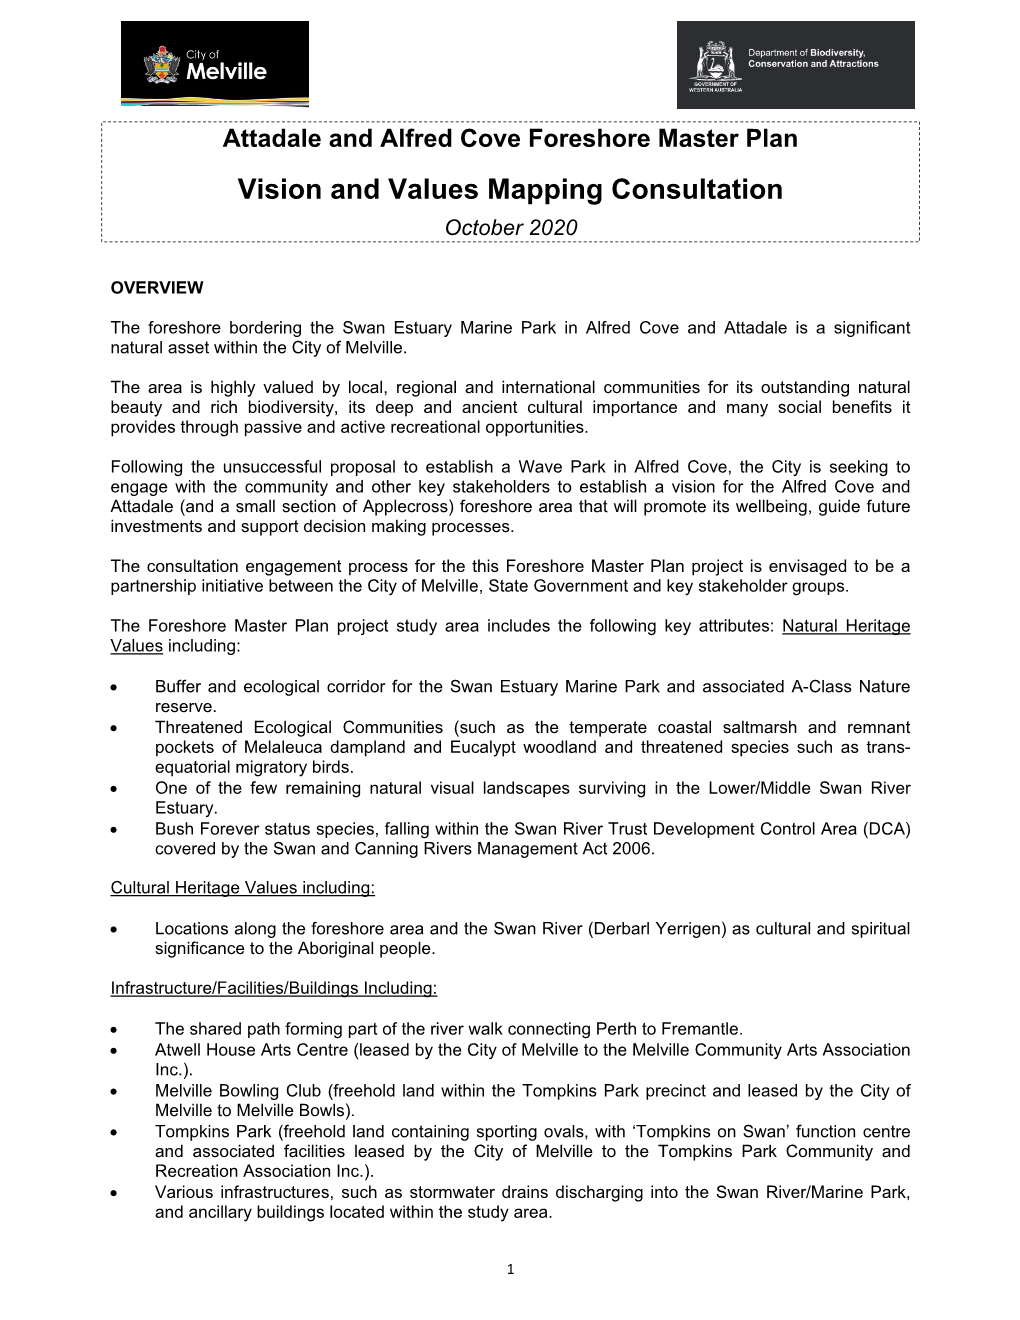 Vision and Values Mapping Consultation October 2020